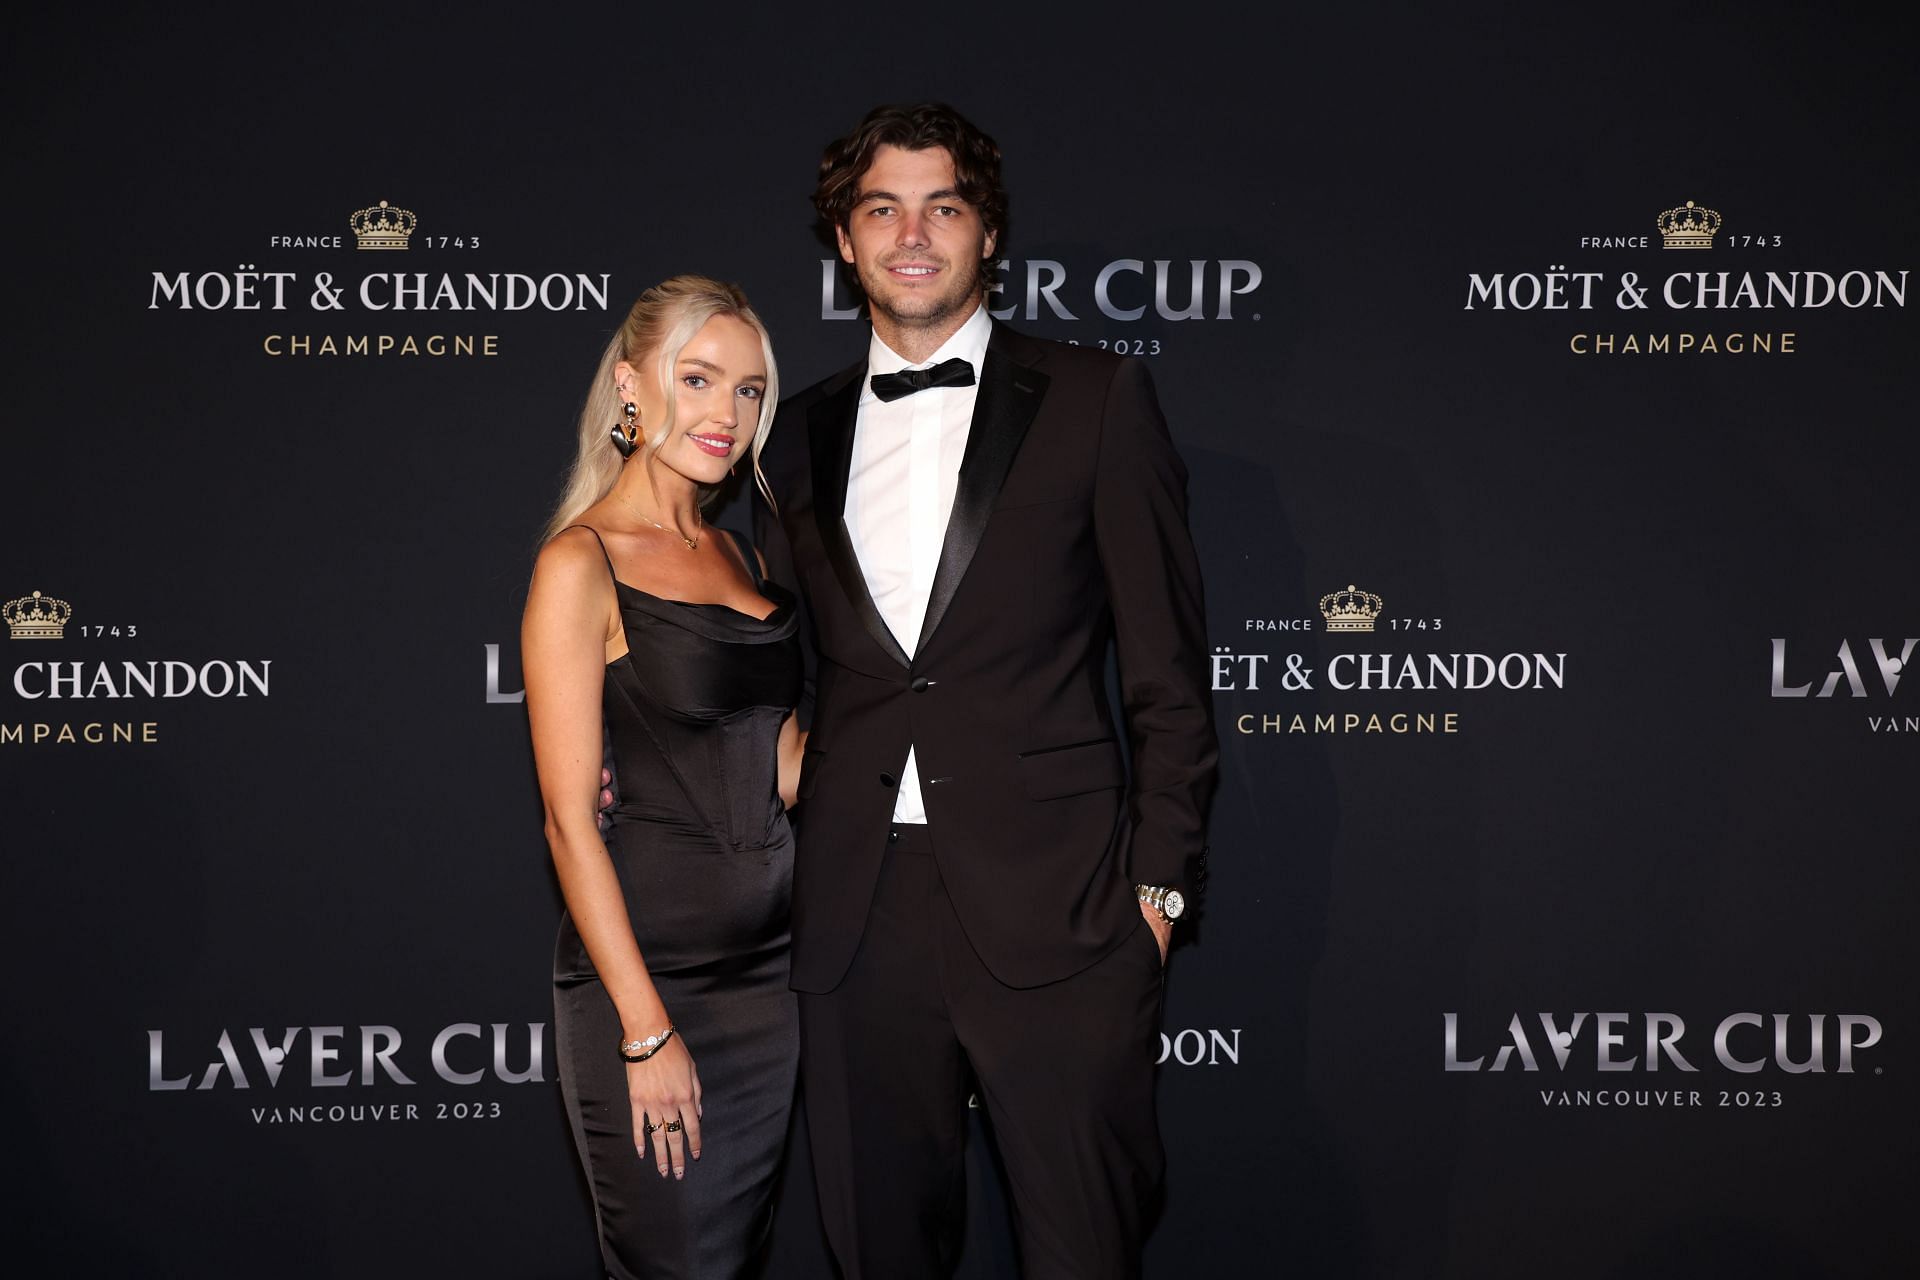 Taylor Fritz and girlfriend Morgan Riddle pictured at the 2023 Laver Cup 2023